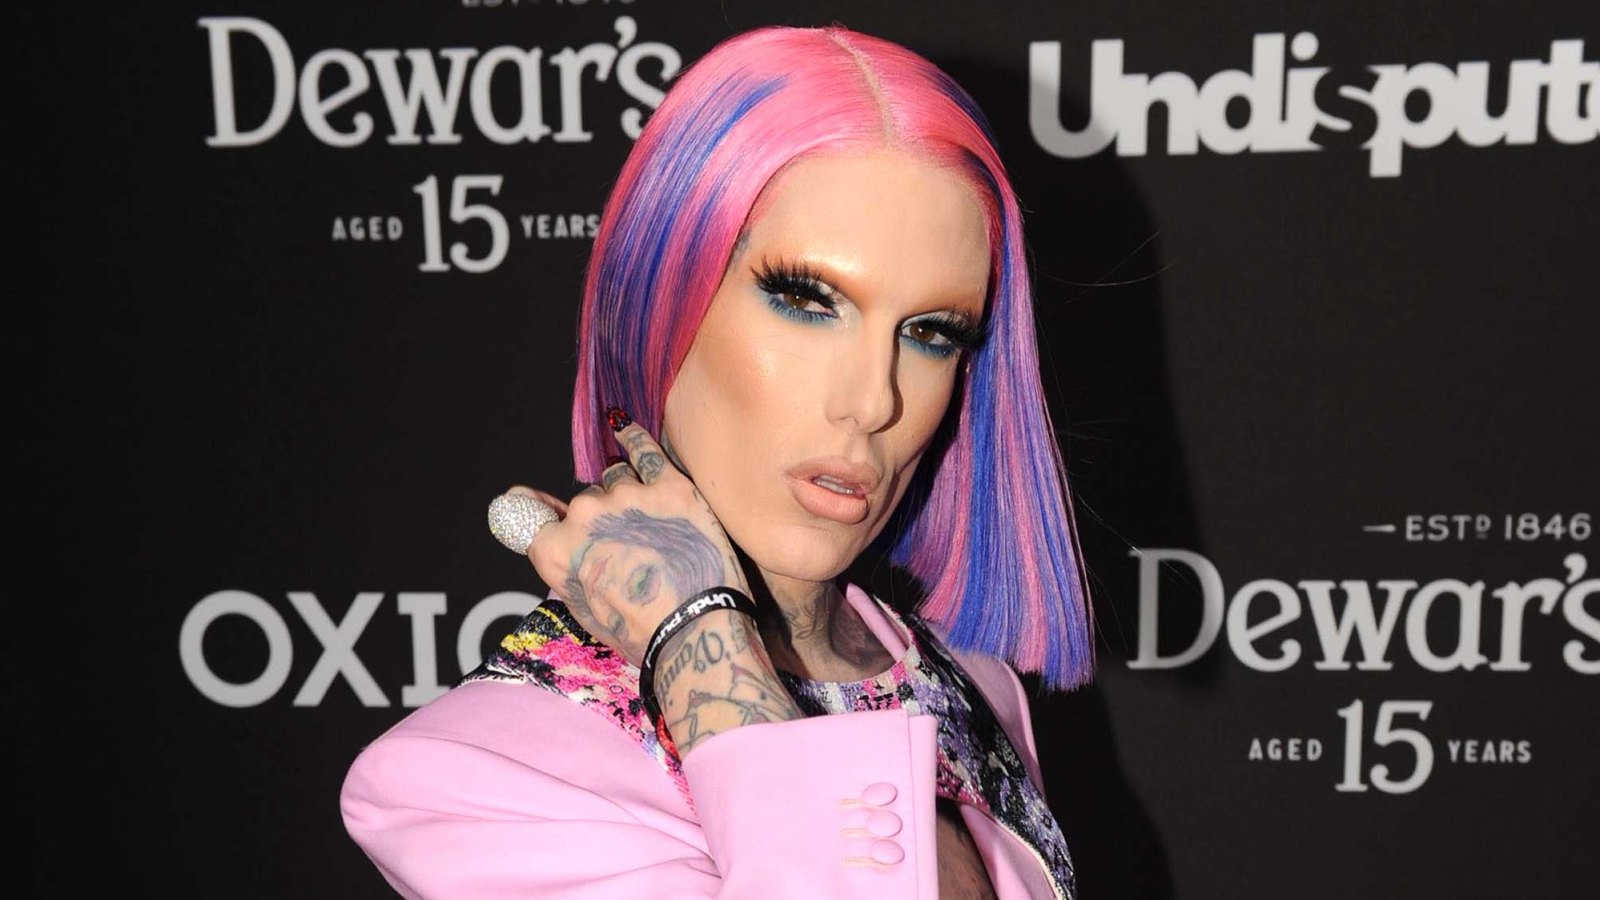 YouTubes Jeffree Star Hospitalized Following Severe Car Accident